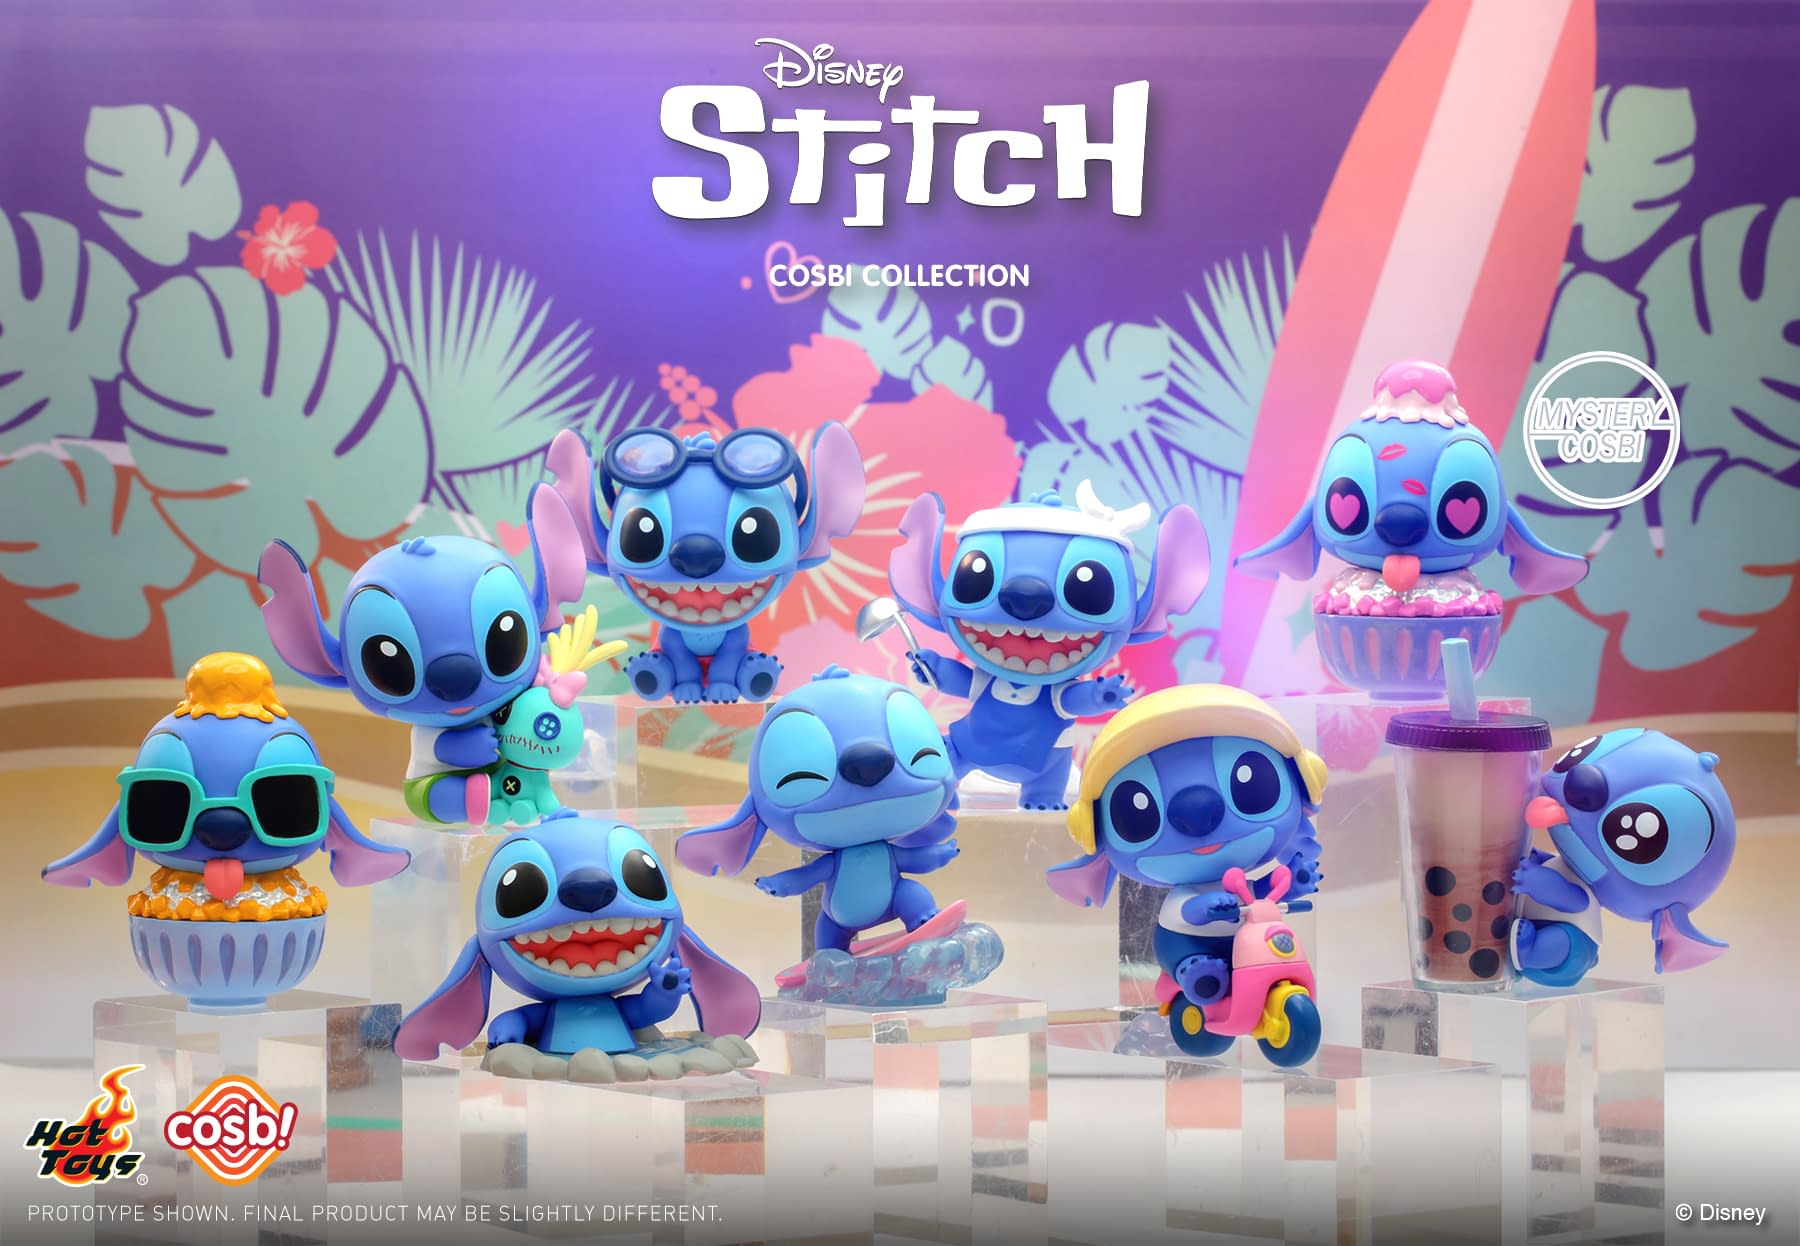 Stitch Welcomes the Summer with New Lilo & Stitch Hot Toys Cosbi's 